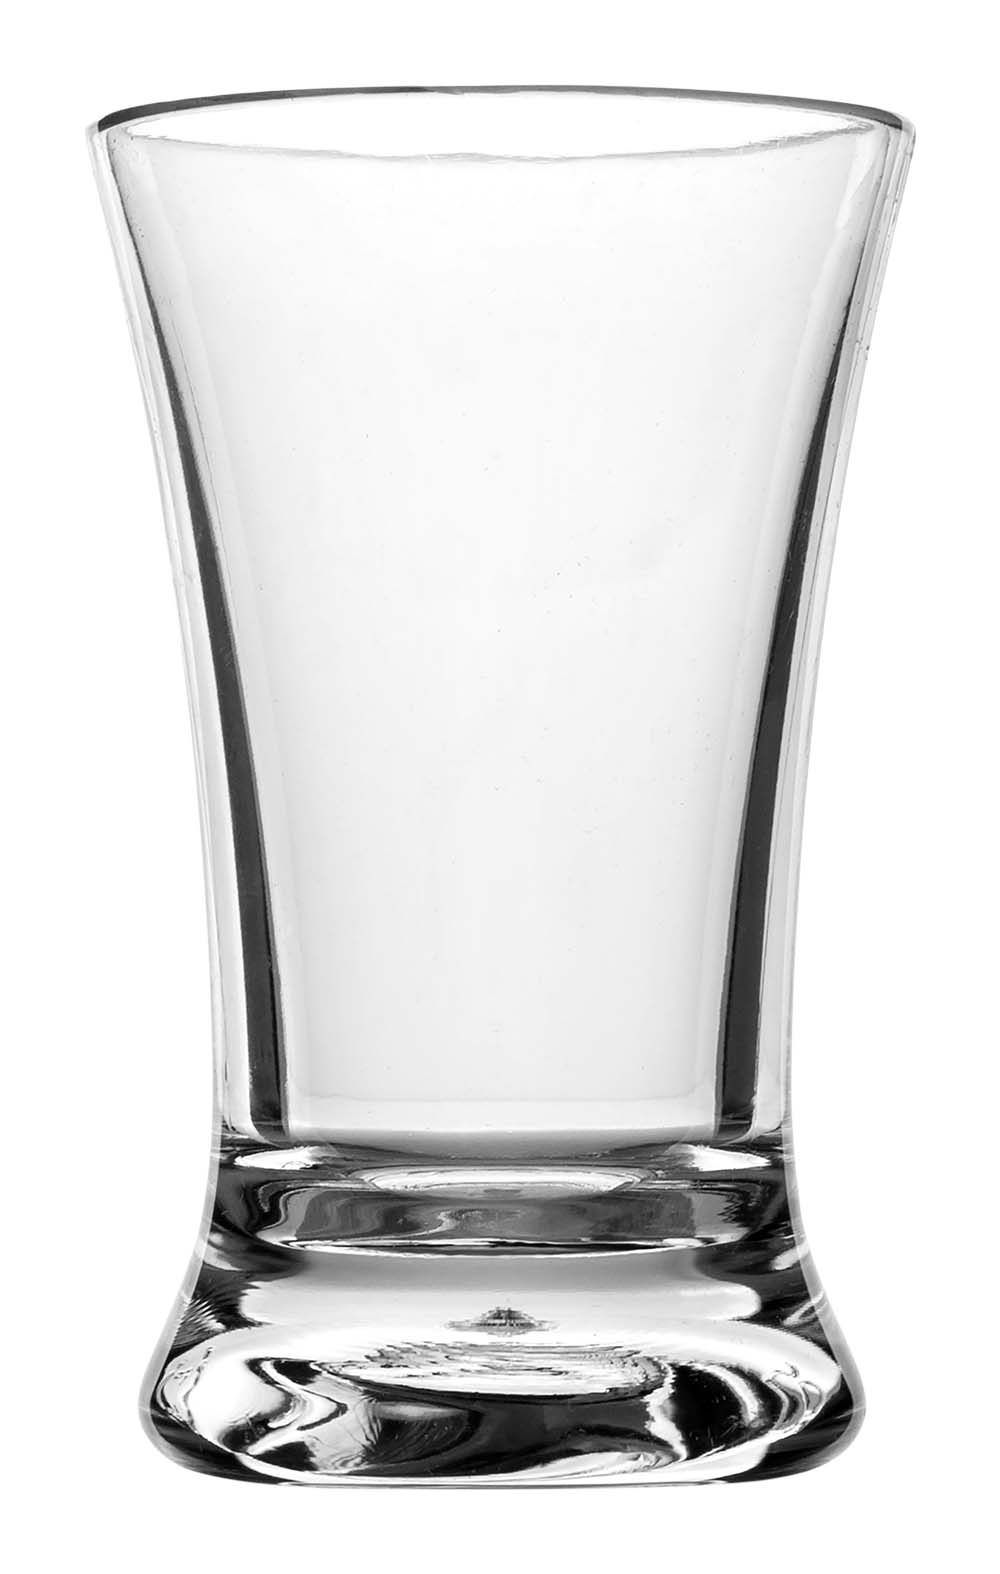 6101443 Sturdy and unbreakable shot glasses. Made of 100% polycarbonate This makes the glasses almost unbreakable, light weight and scratch proof. The glasses are also dishwasher safe. Packed in units of 4.